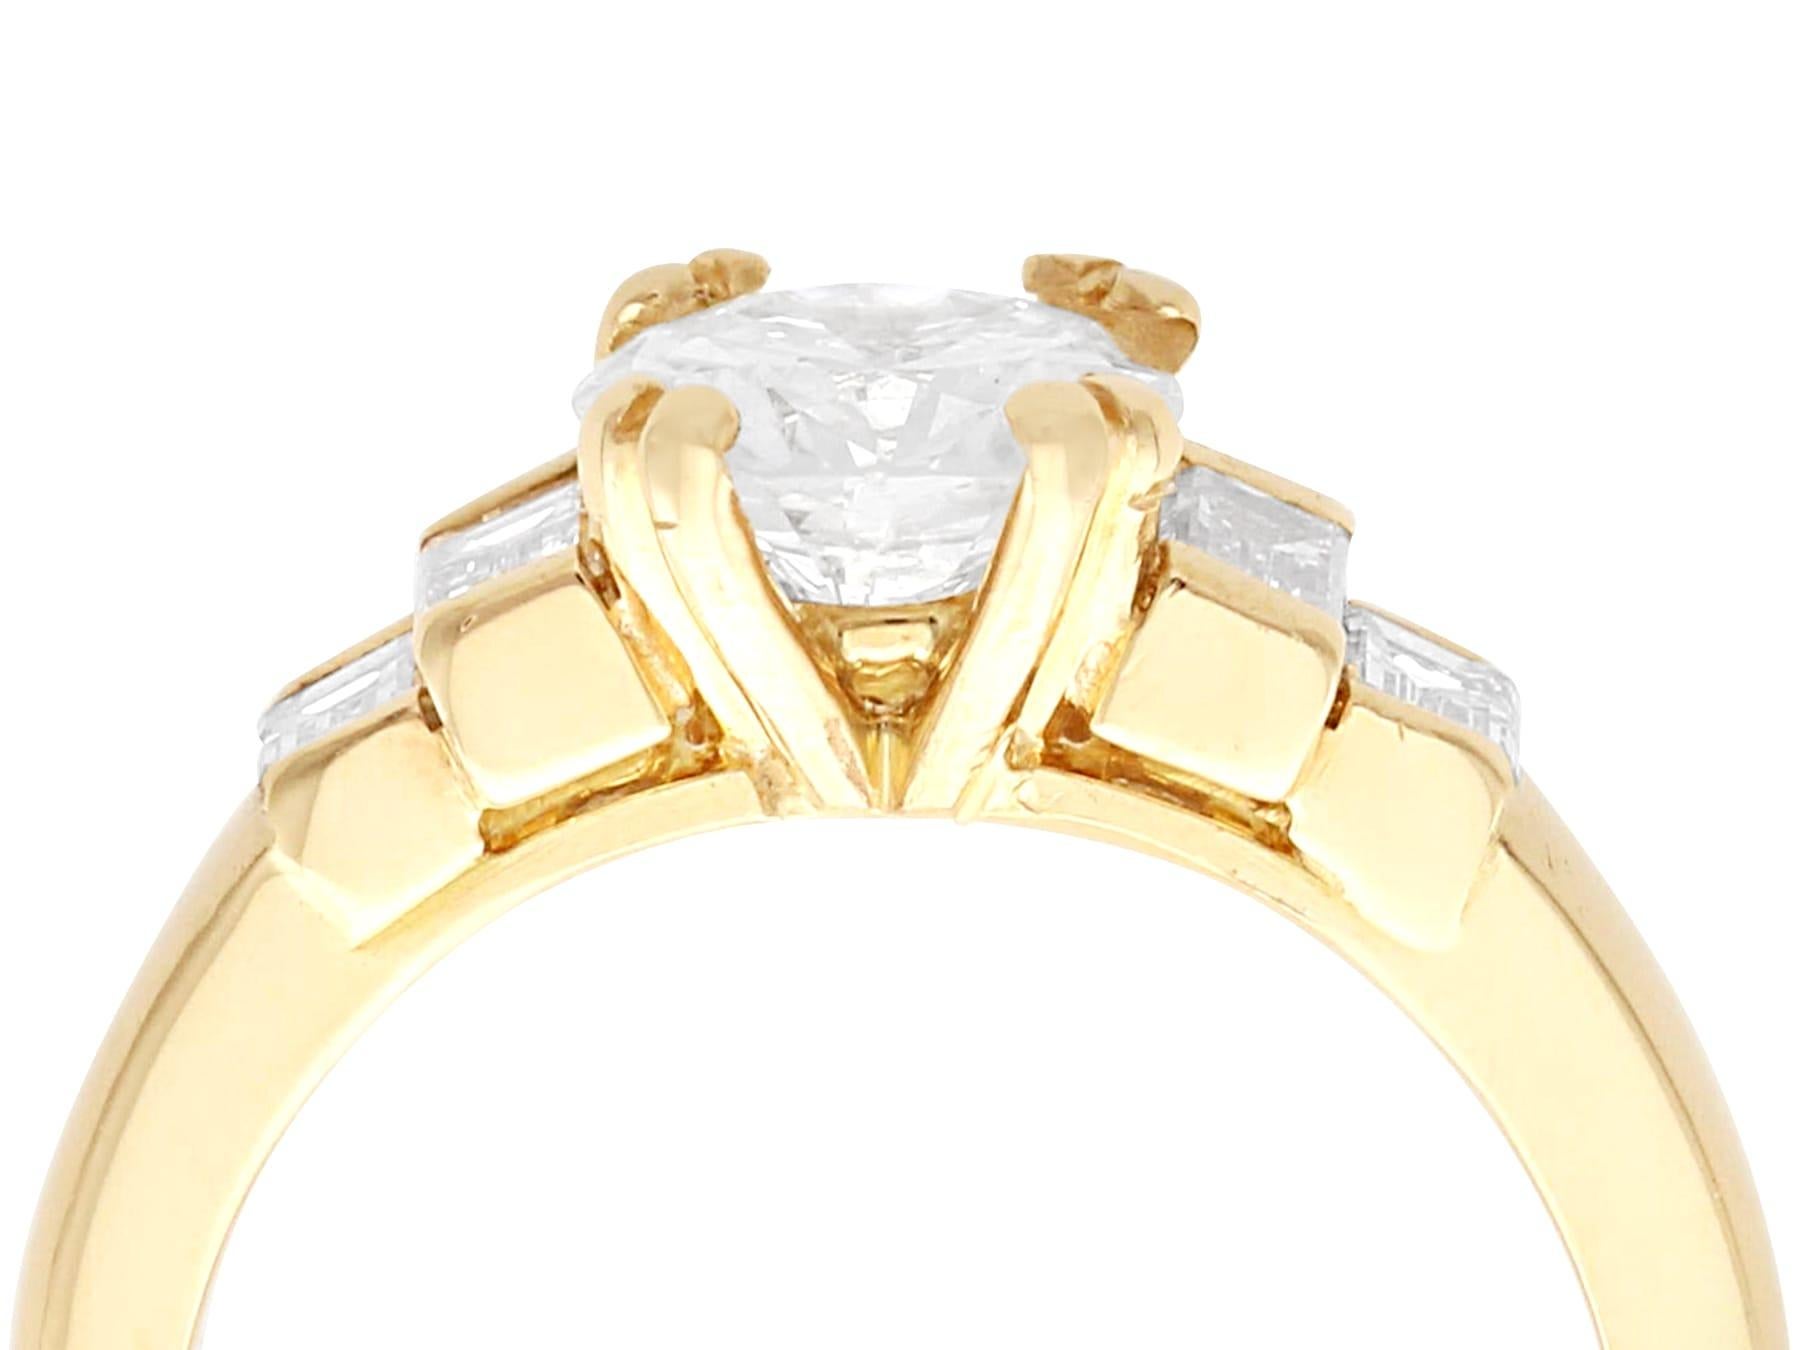 A stunning, fine, and impressive vintage French 1.38 carat diamond and 18 karat yellow gold solitaire ring; part of our diverse collection of vintage jewellery and estate jewelry

This stunning, fine and impressive diamond engagement ring has been